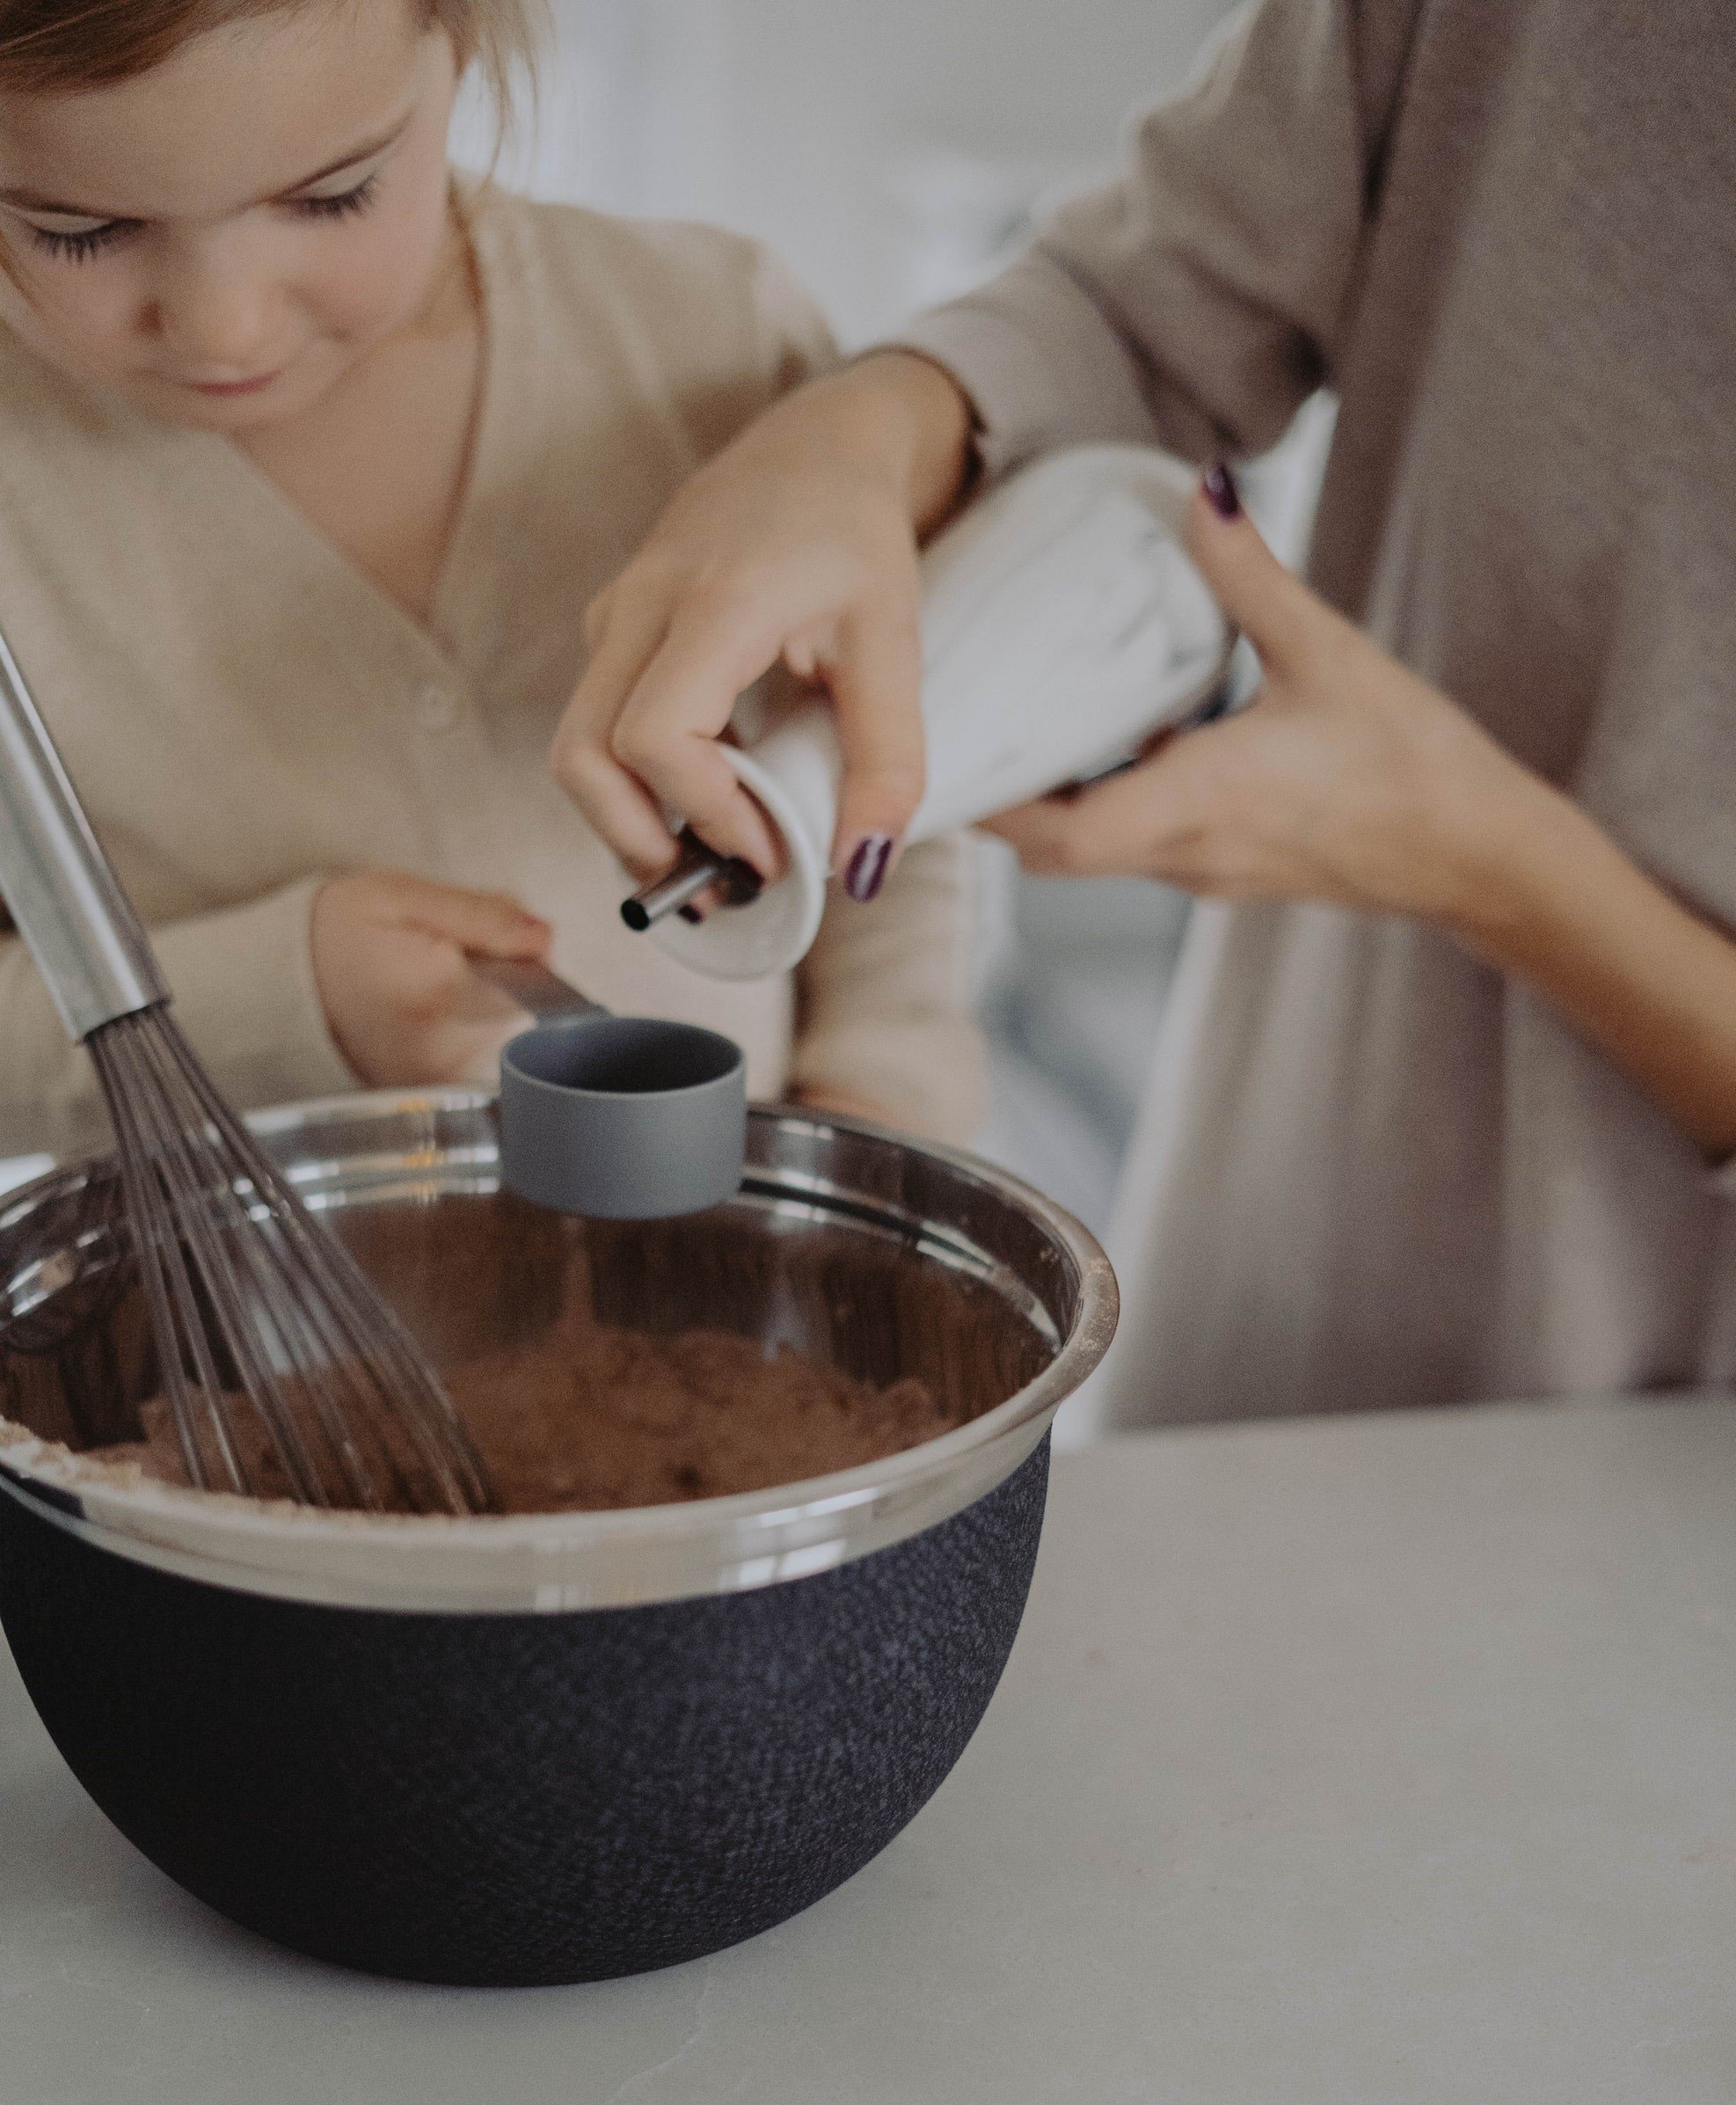 Nola was baking cookies with her daughter when the phone rang | Source: Unsplash